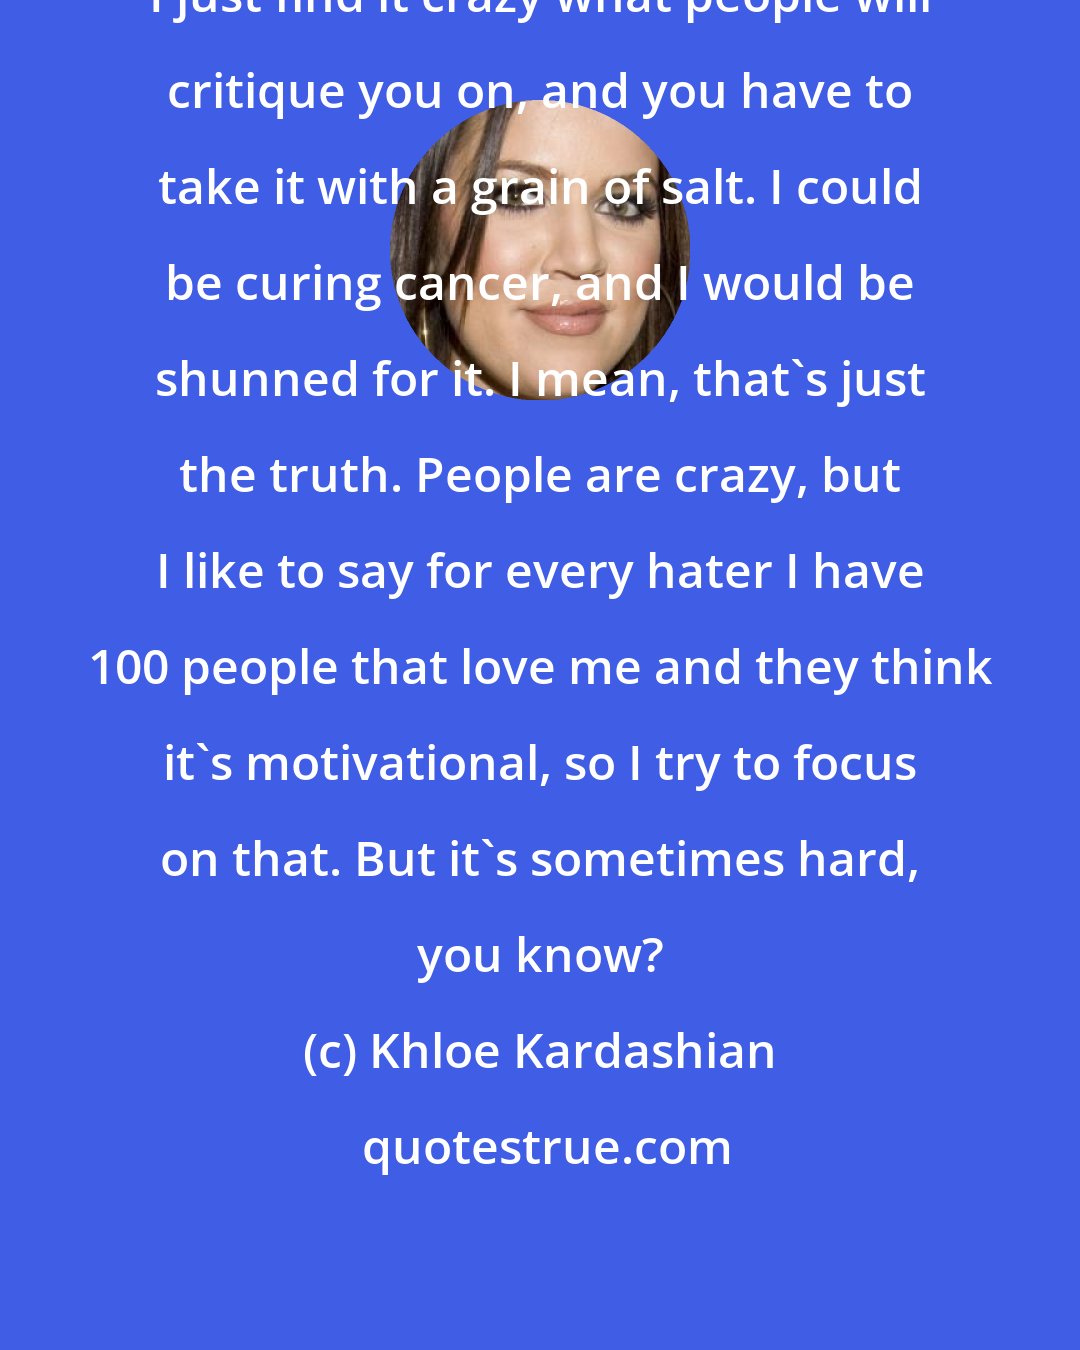 Khloe Kardashian: I just find it crazy what people will critique you on, and you have to take it with a grain of salt. I could be curing cancer, and I would be shunned for it. I mean, that's just the truth. People are crazy, but I like to say for every hater I have 100 people that love me and they think it's motivational, so I try to focus on that. But it's sometimes hard, you know?